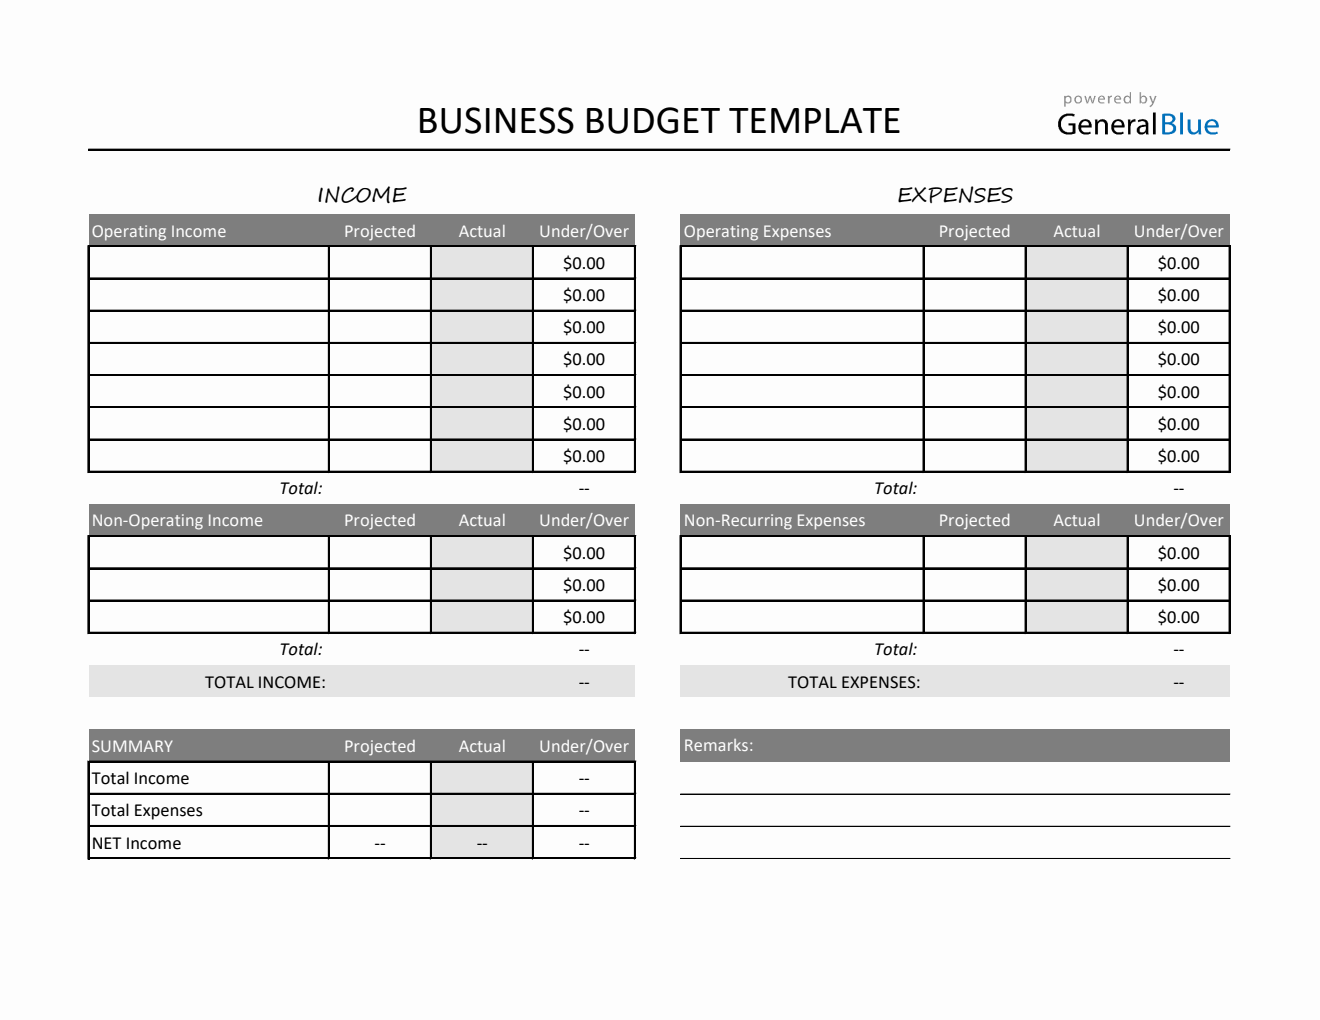 Printable Business Budget Template in Excel (Gray)